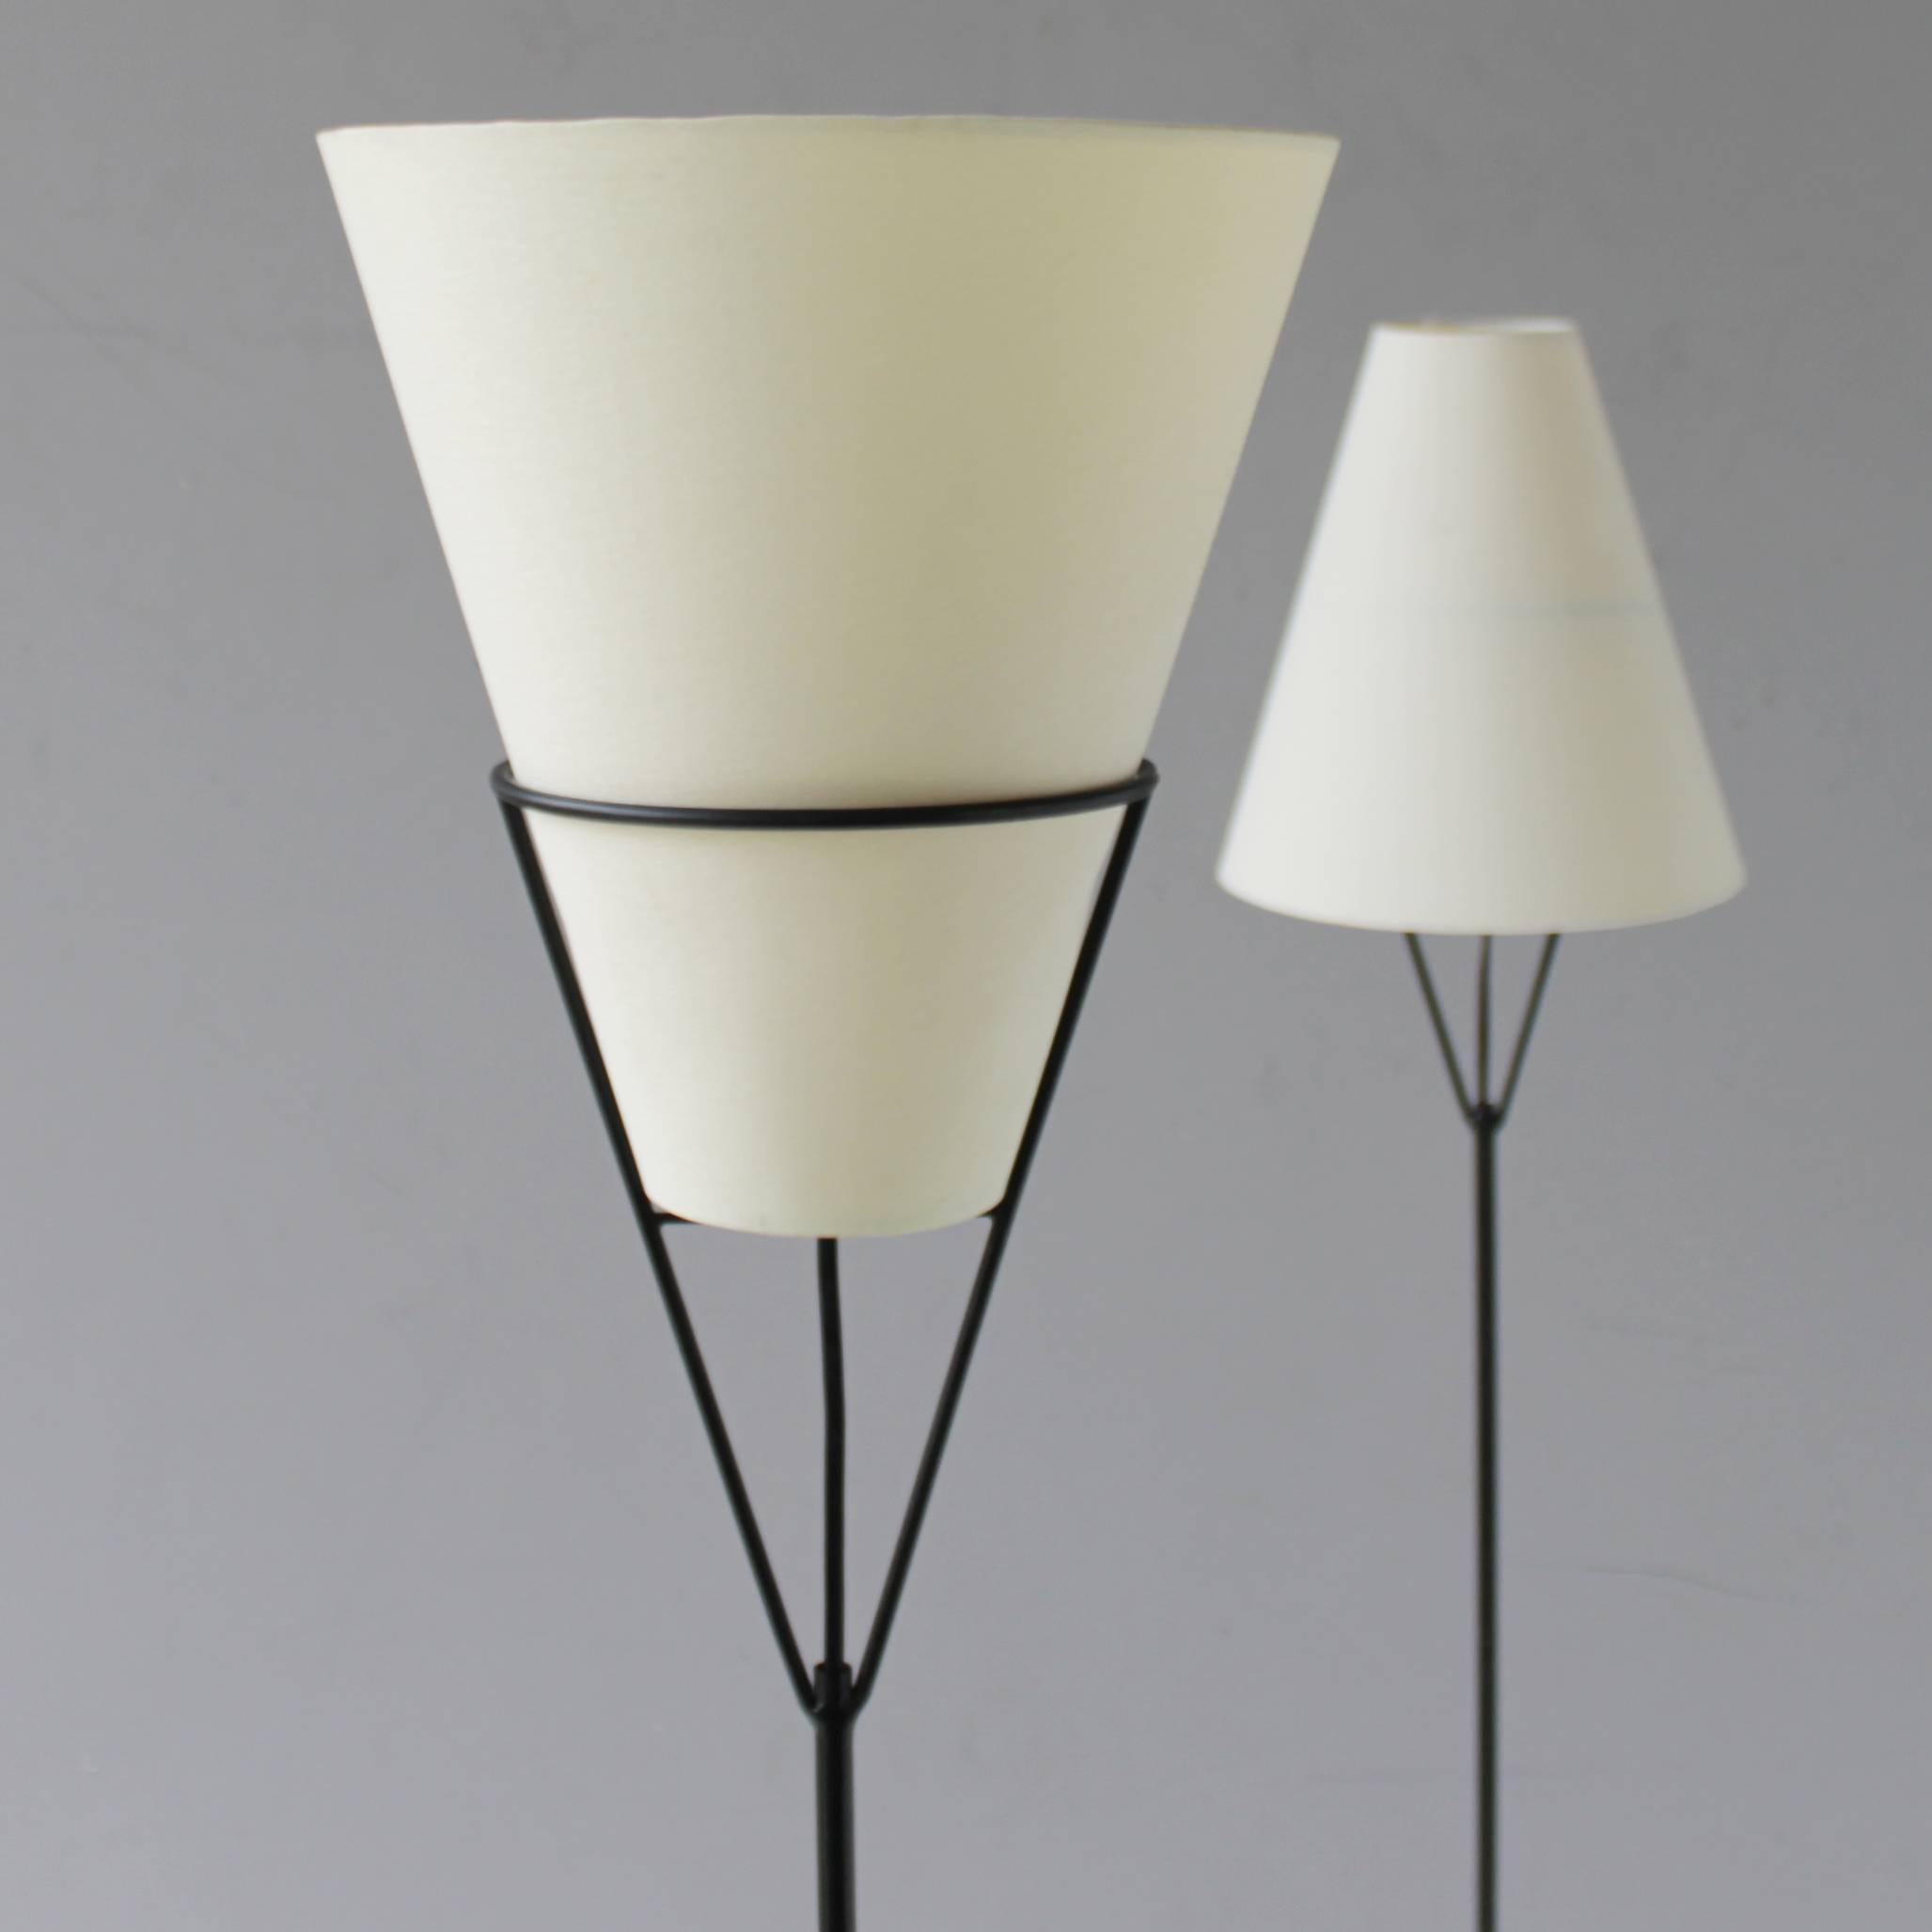 Pair of 'Vice Versa' floor lamps by Carl Auböck, Austria. Also known as 'Die Umkehr Lampe'. Beautiful elegant lamp on a heavy iron base. Modernistic design from the 1950s. Multifunctional, both uplighting as downlighting, depending of the position